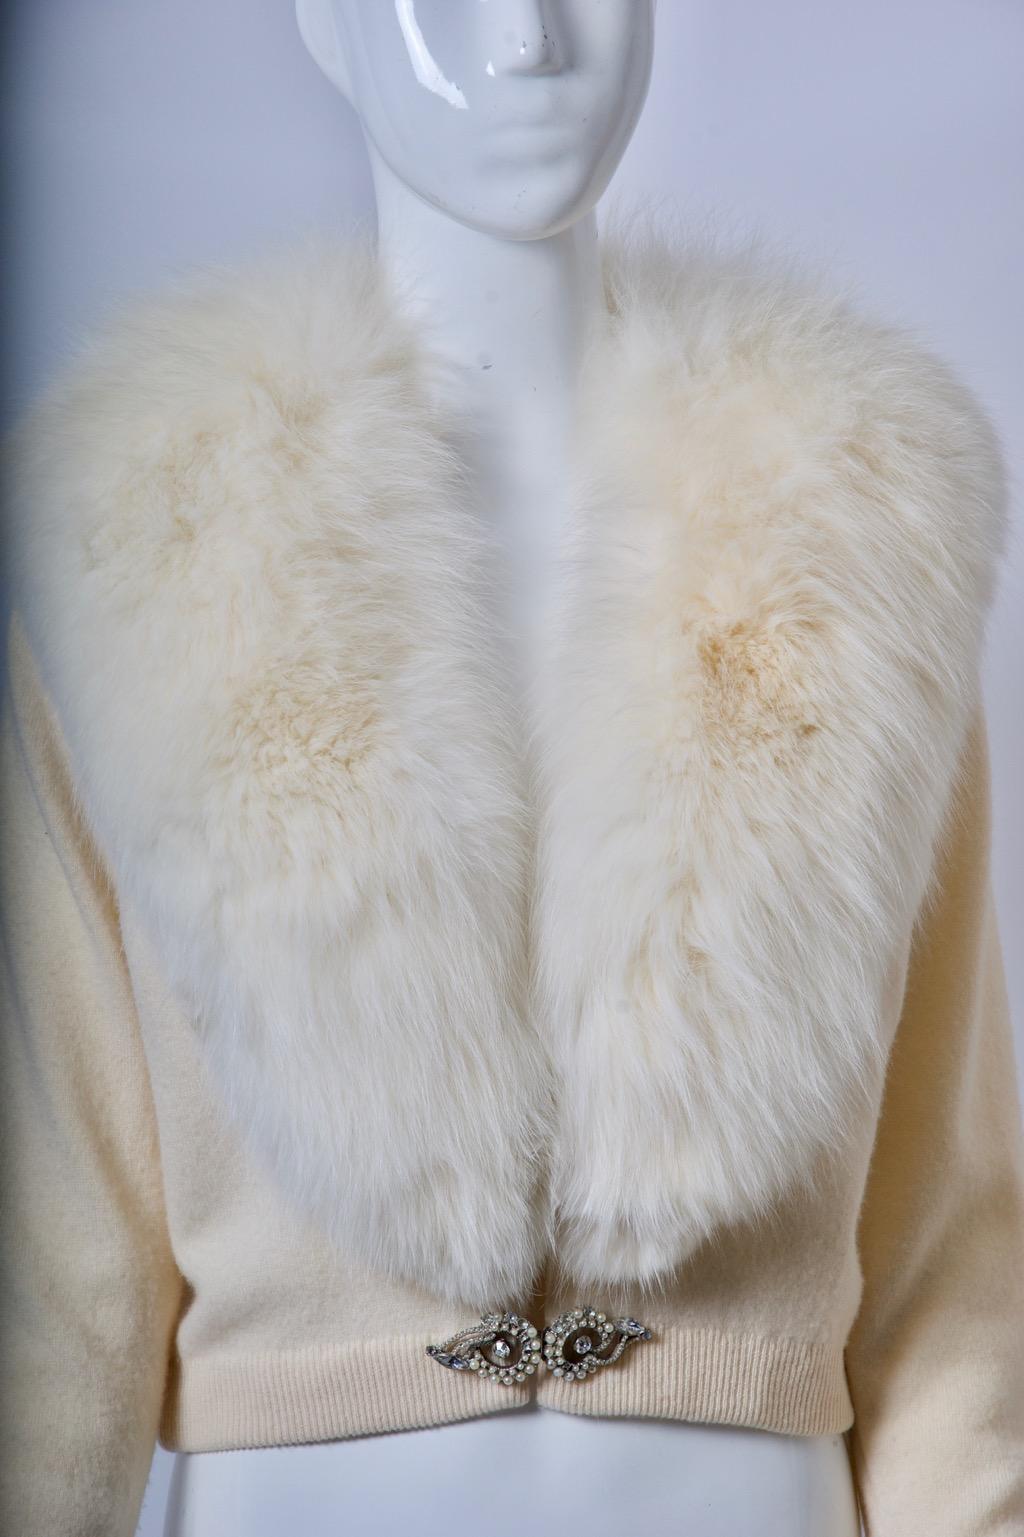 Among my favorite vintage items are the embellished cardigans from the 1950s-'60s, many of them with fur collars. This example, rare for its excellent condition, is made of ivory cashmere with a lush white fox collar, which is connected with snaps